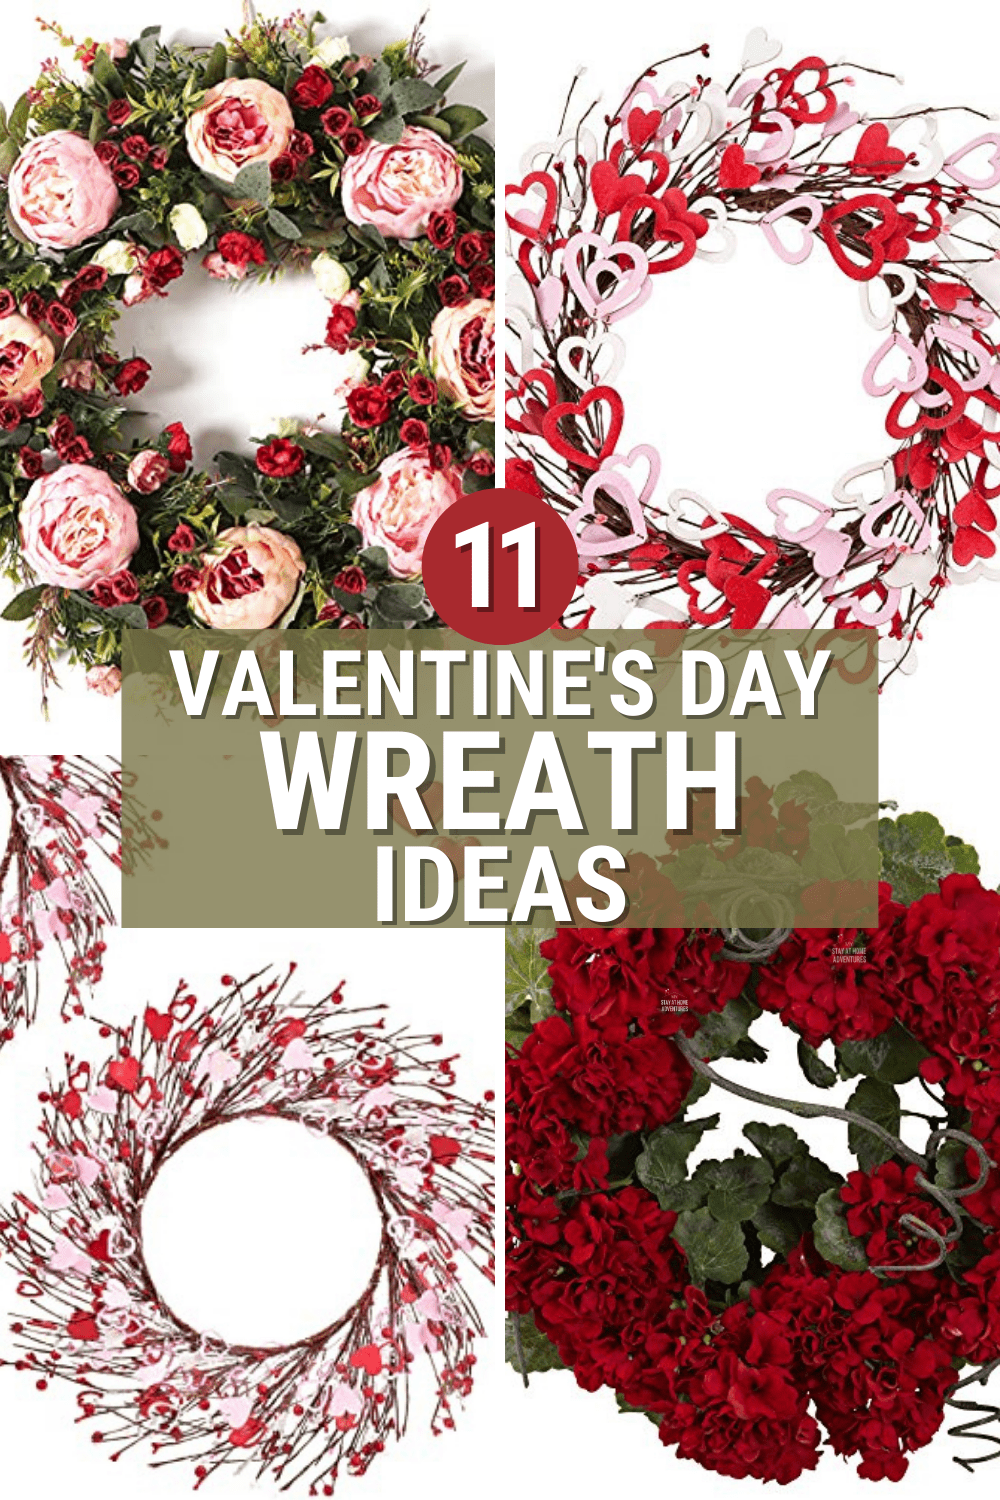 Are you looking for Valentine's Day wreaths ideas? Check out our roundup of 11 creative and chic DIY wreath projects. via @mystayathome